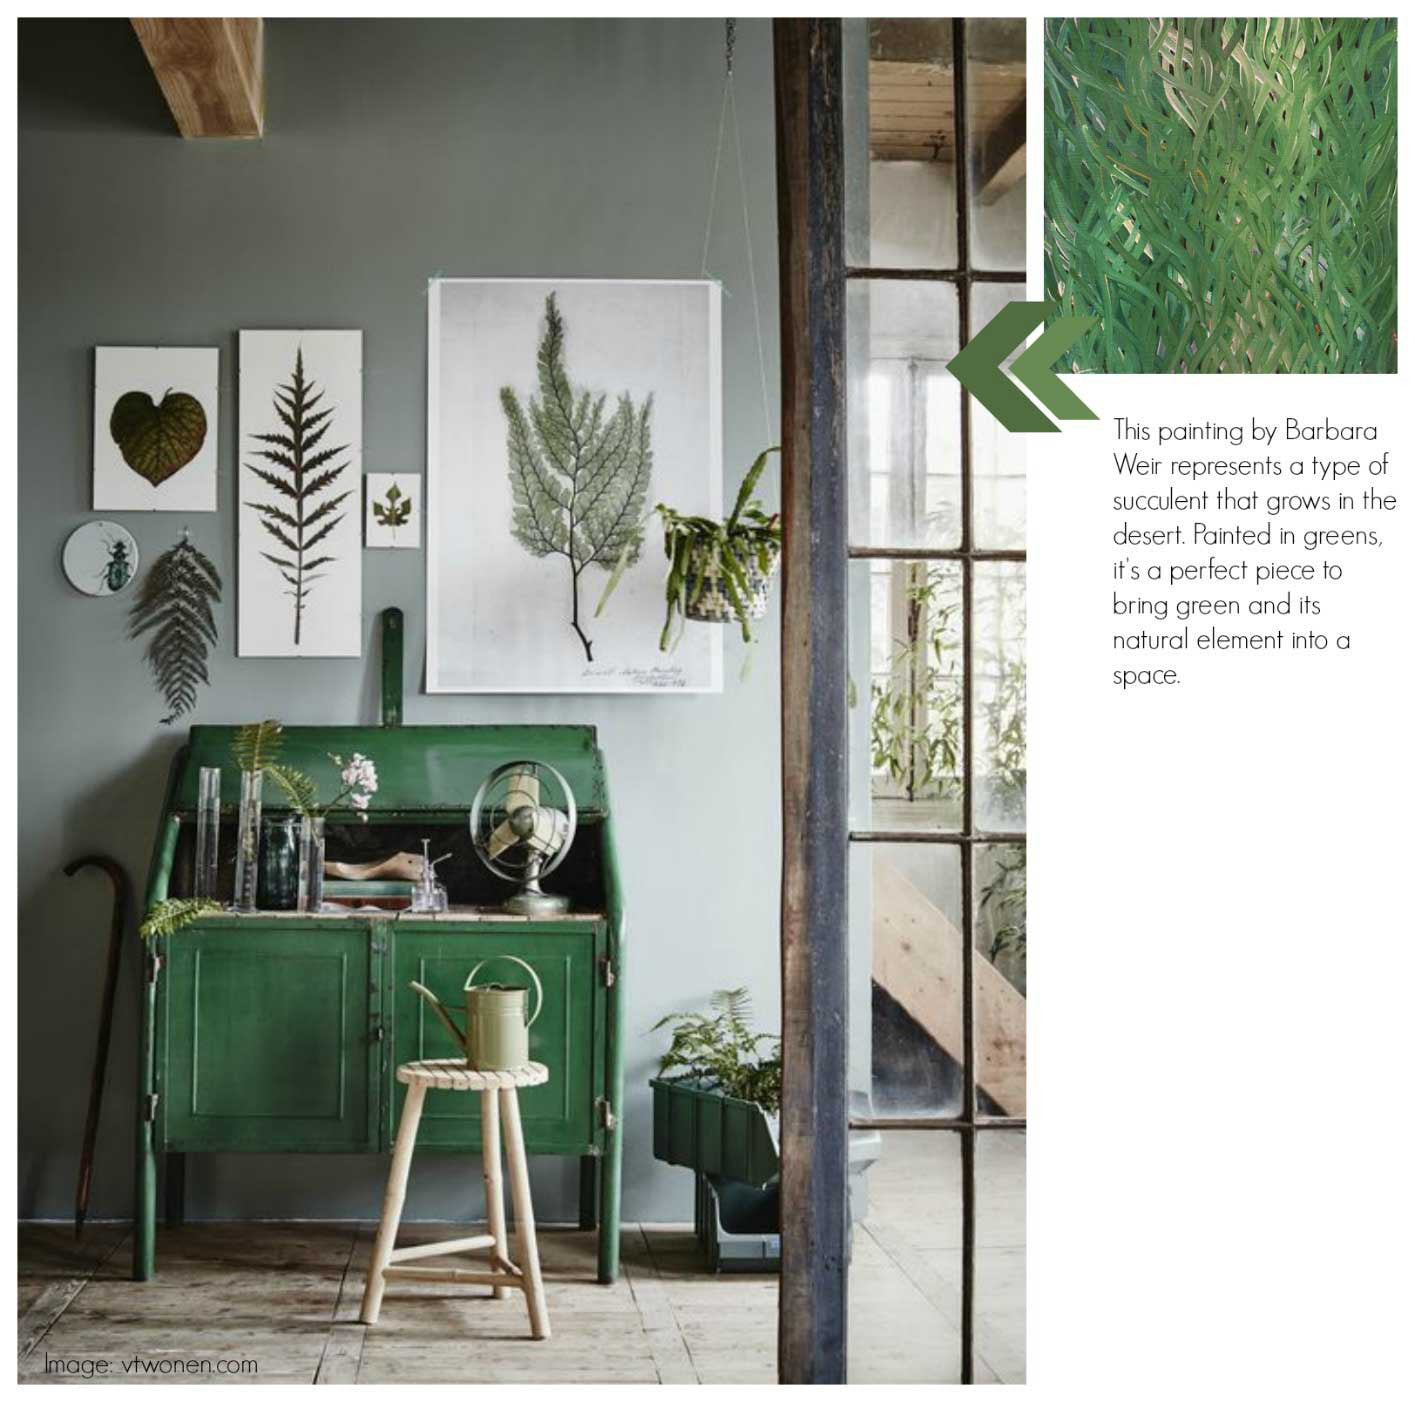 Decorating with green